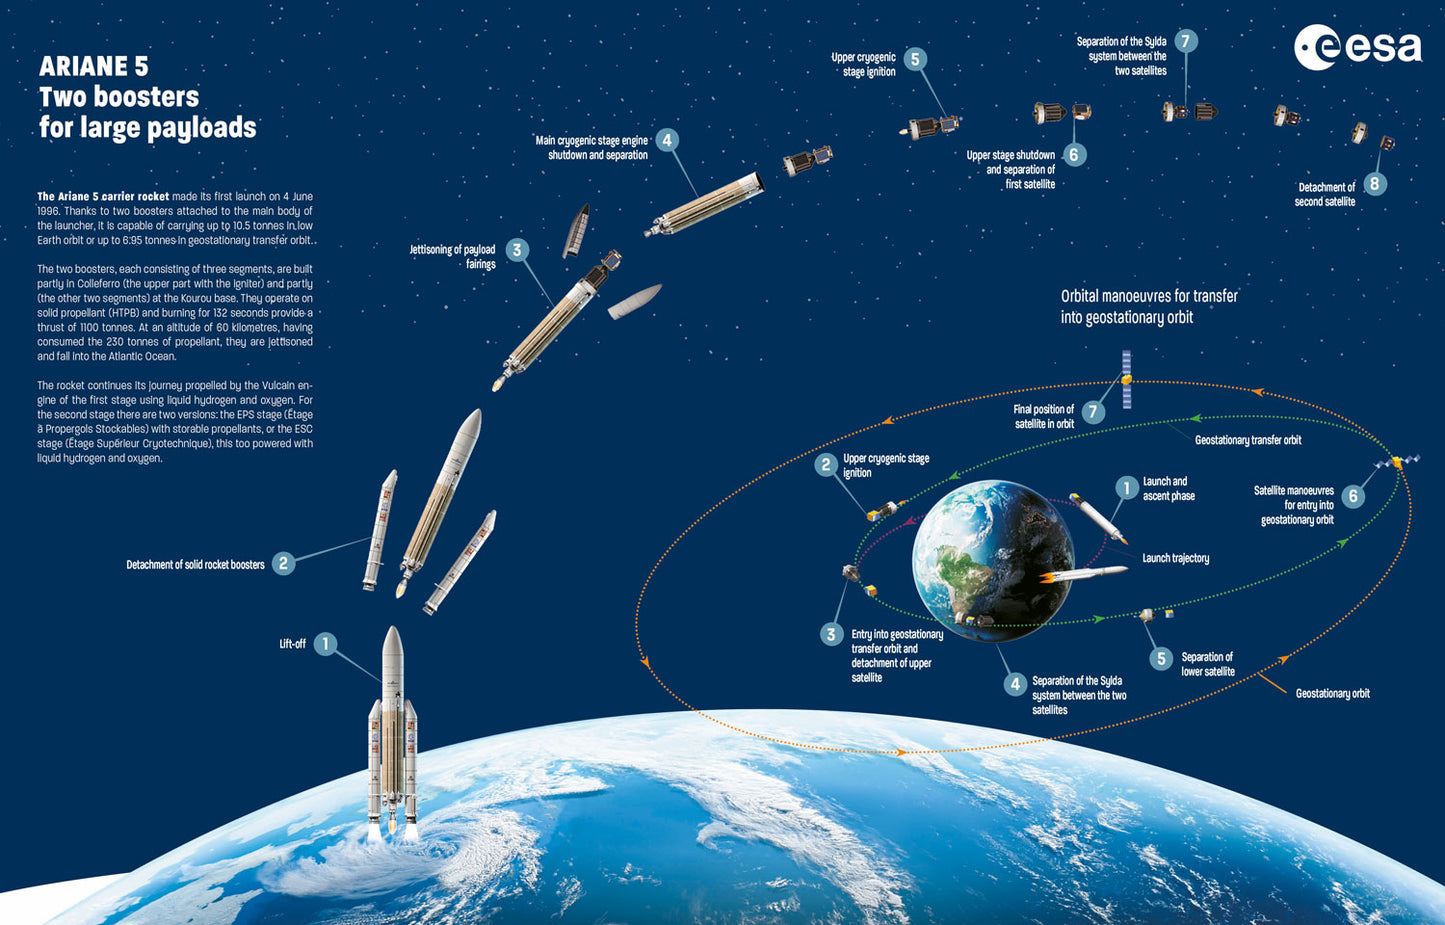 When the sky is not the limit::The story of how a company set out to conquer space